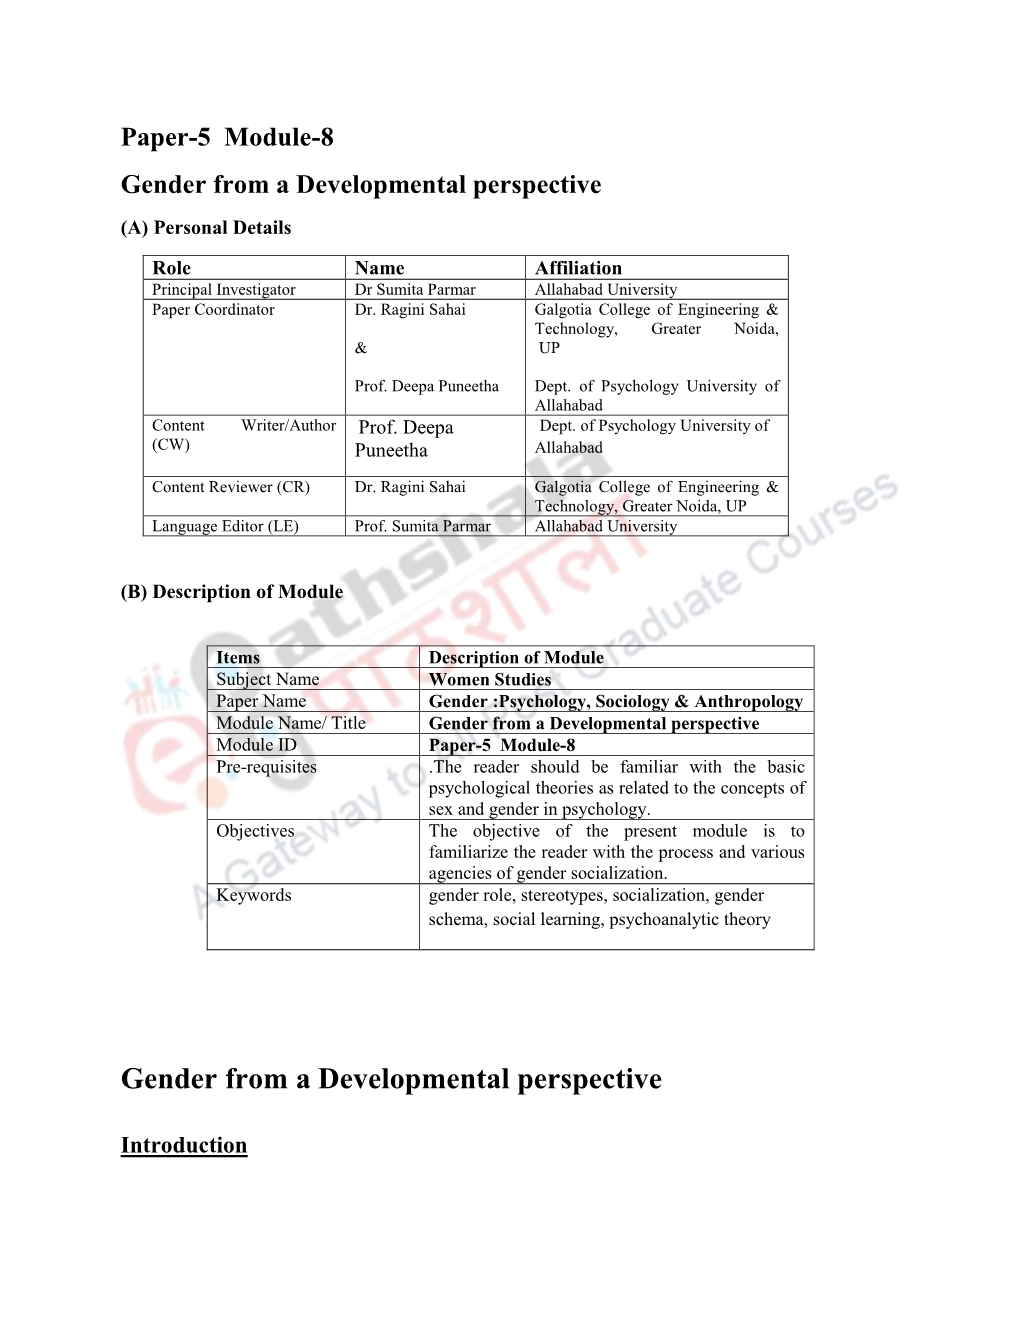 Gender from a Developmental Perspective (A) Personal Details